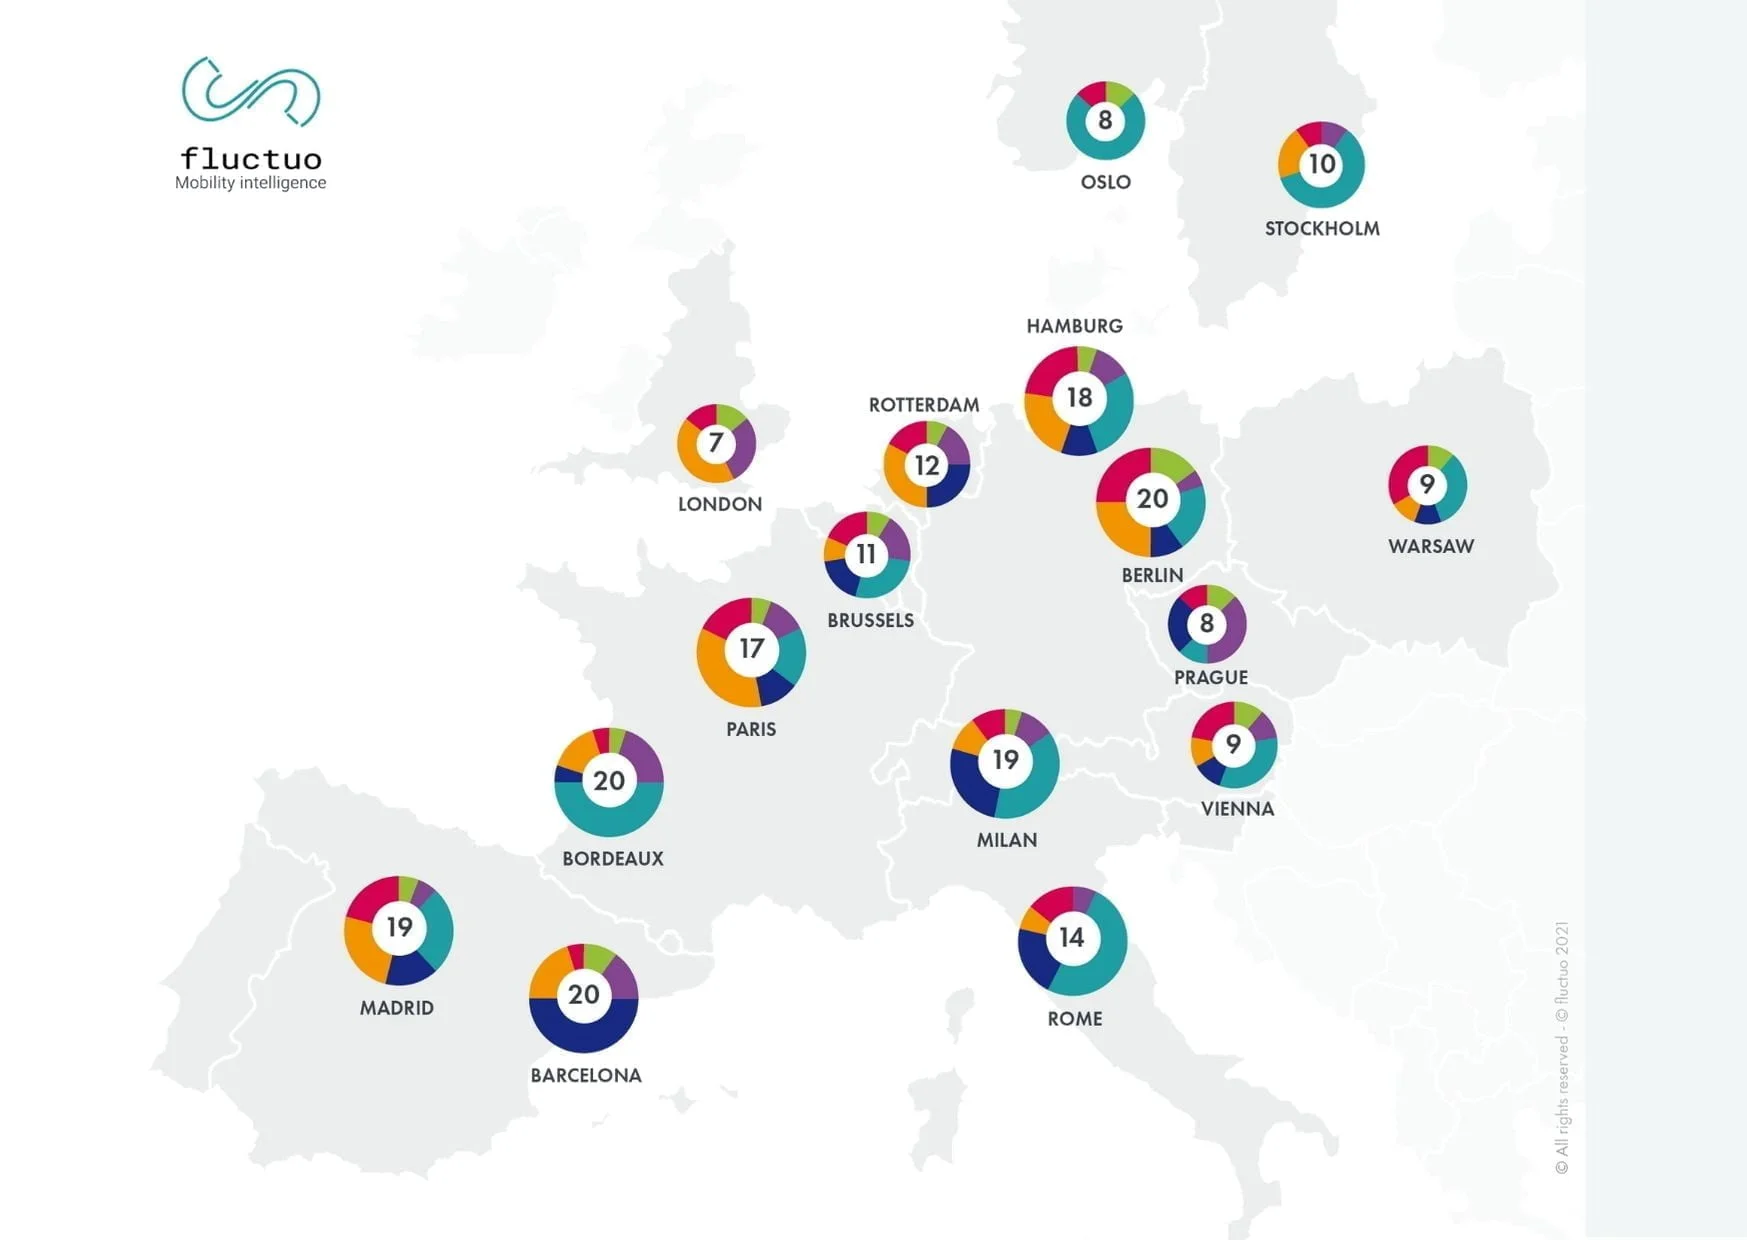 New report provides snapshot of shared mobility industry in Europe